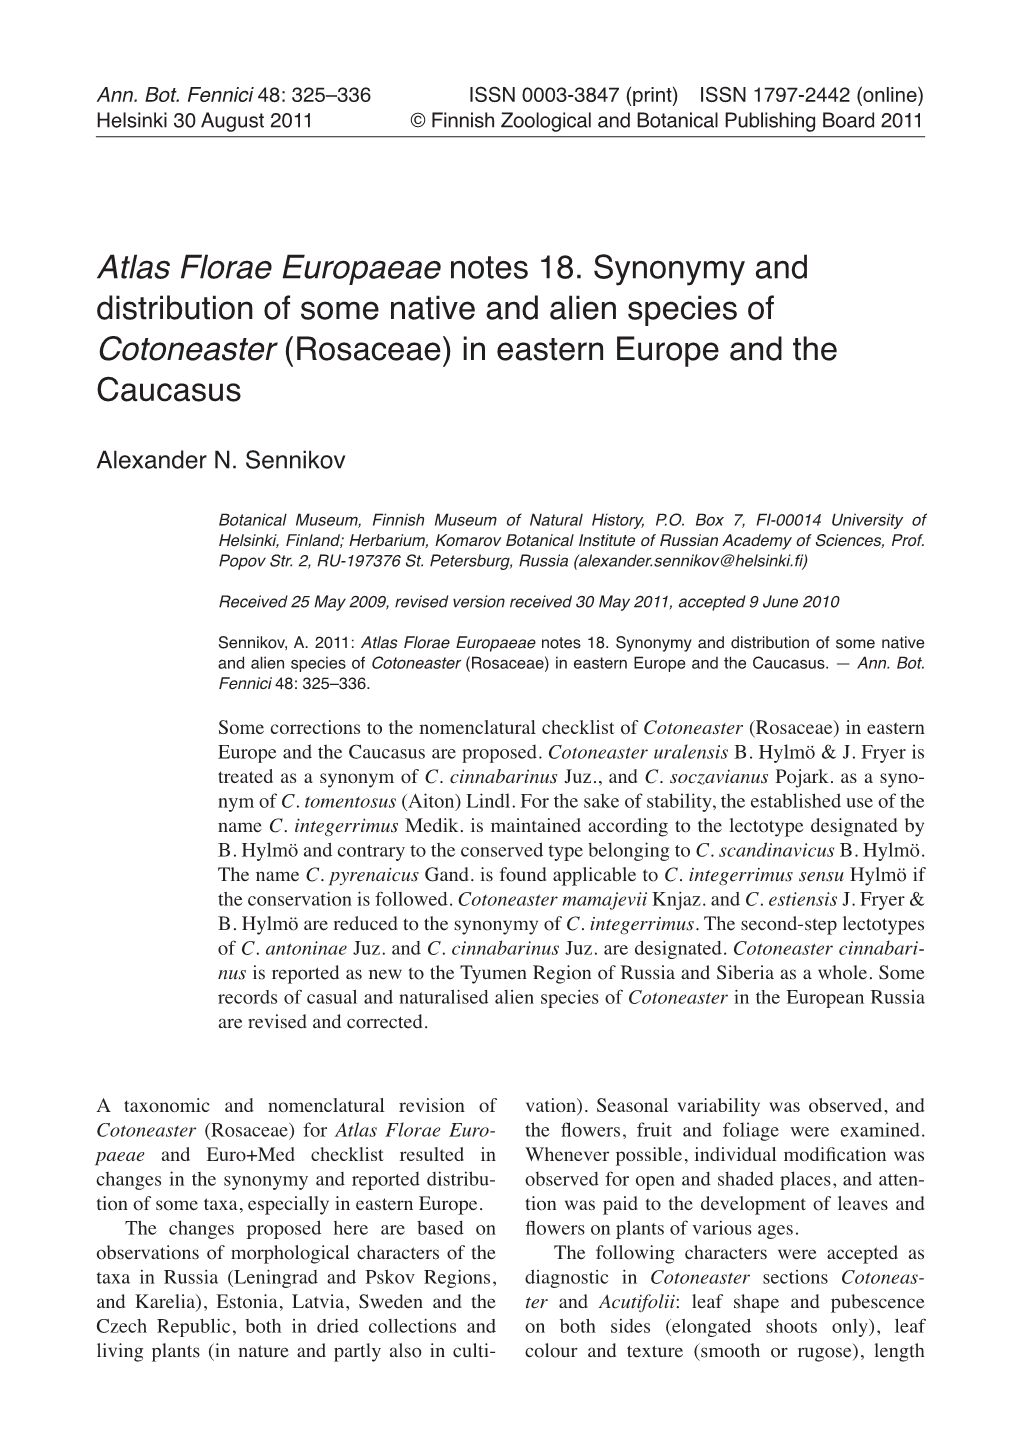 Atlas Florae Europaeae Notes 18. Synonymy and Distribution of Some Native and Alien Species of Cotoneaster (Rosaceae) in Eastern Europe and the Caucasus